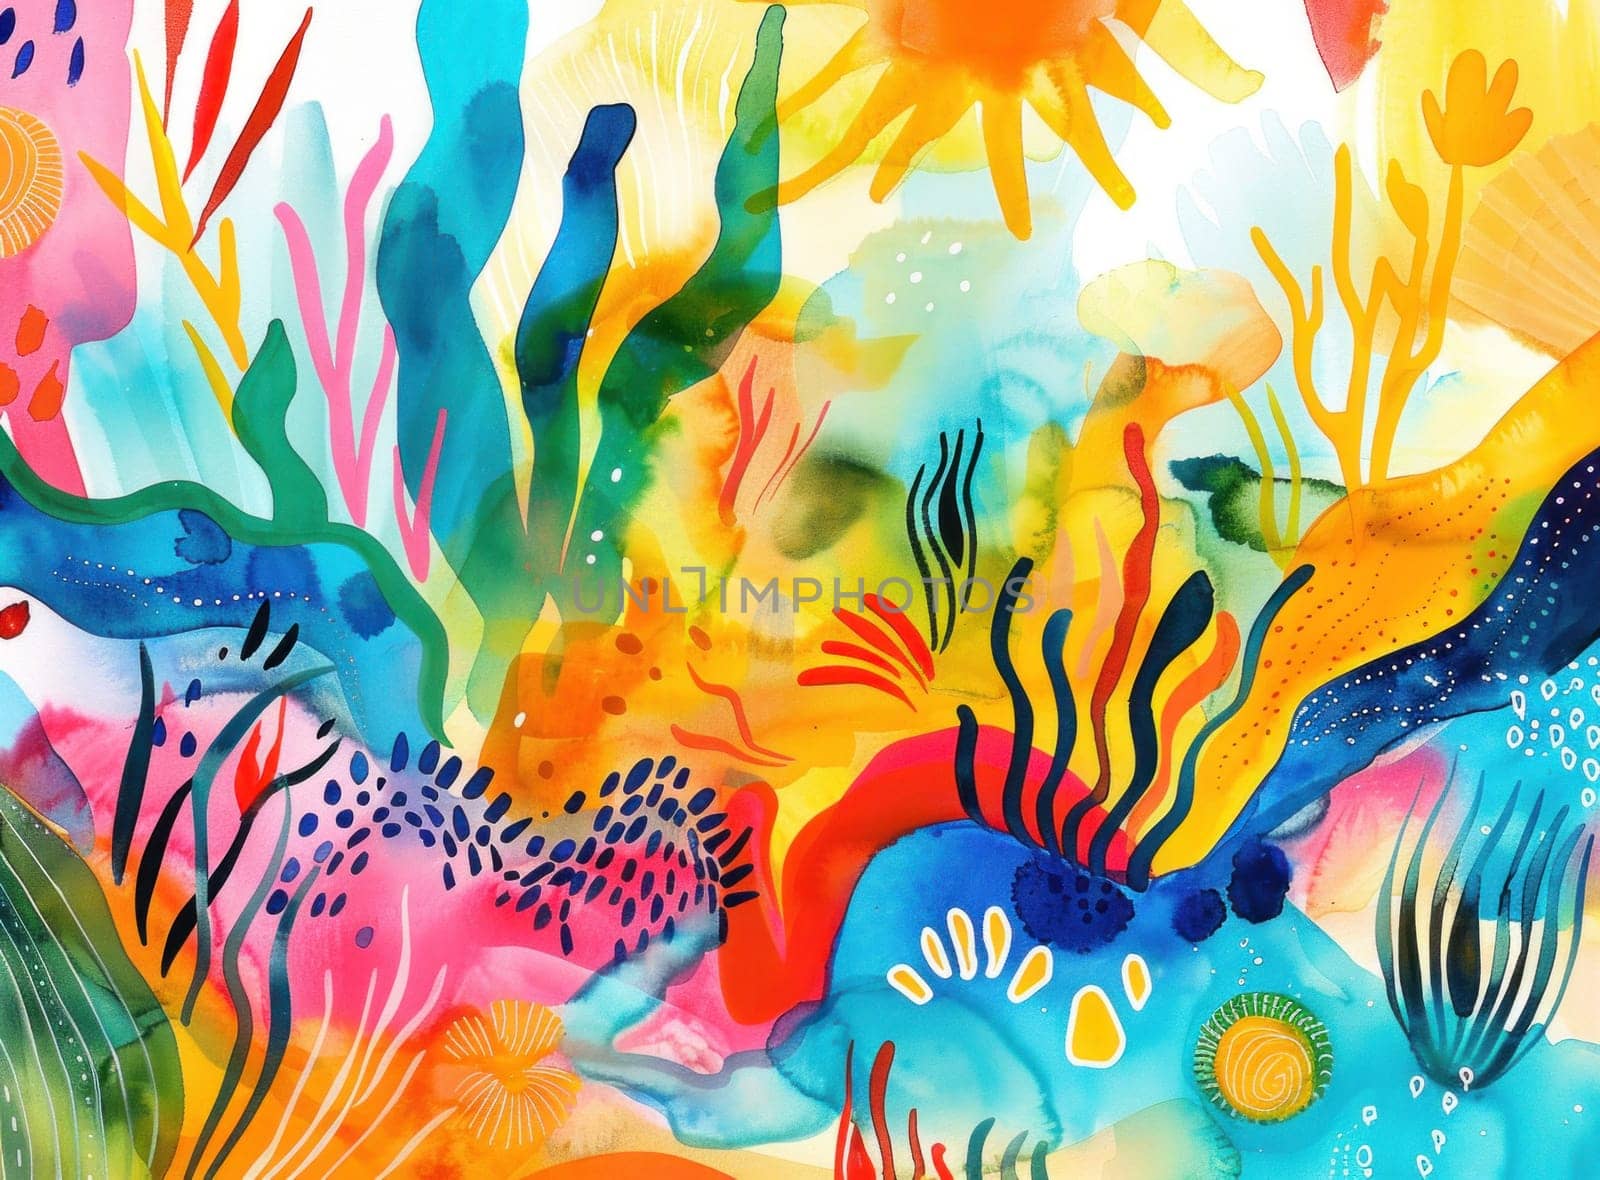 Underwater scene with colorful fish and plants in watercolor for art and travel inspiration